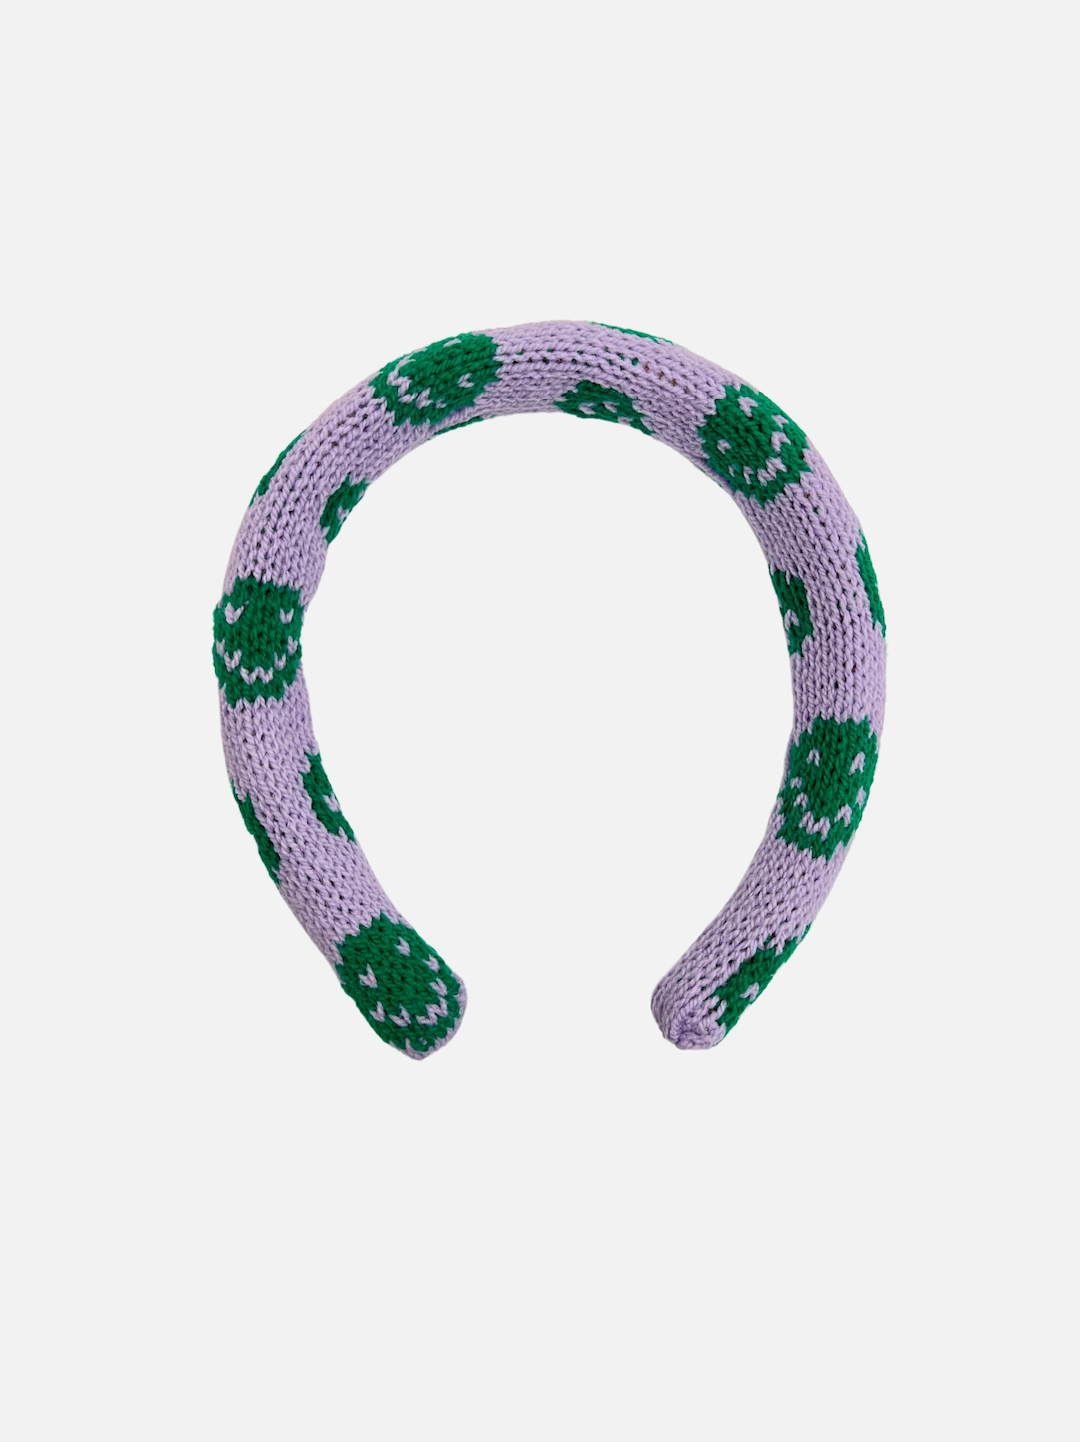 A kids' knitted headband with green smileys on a purple background